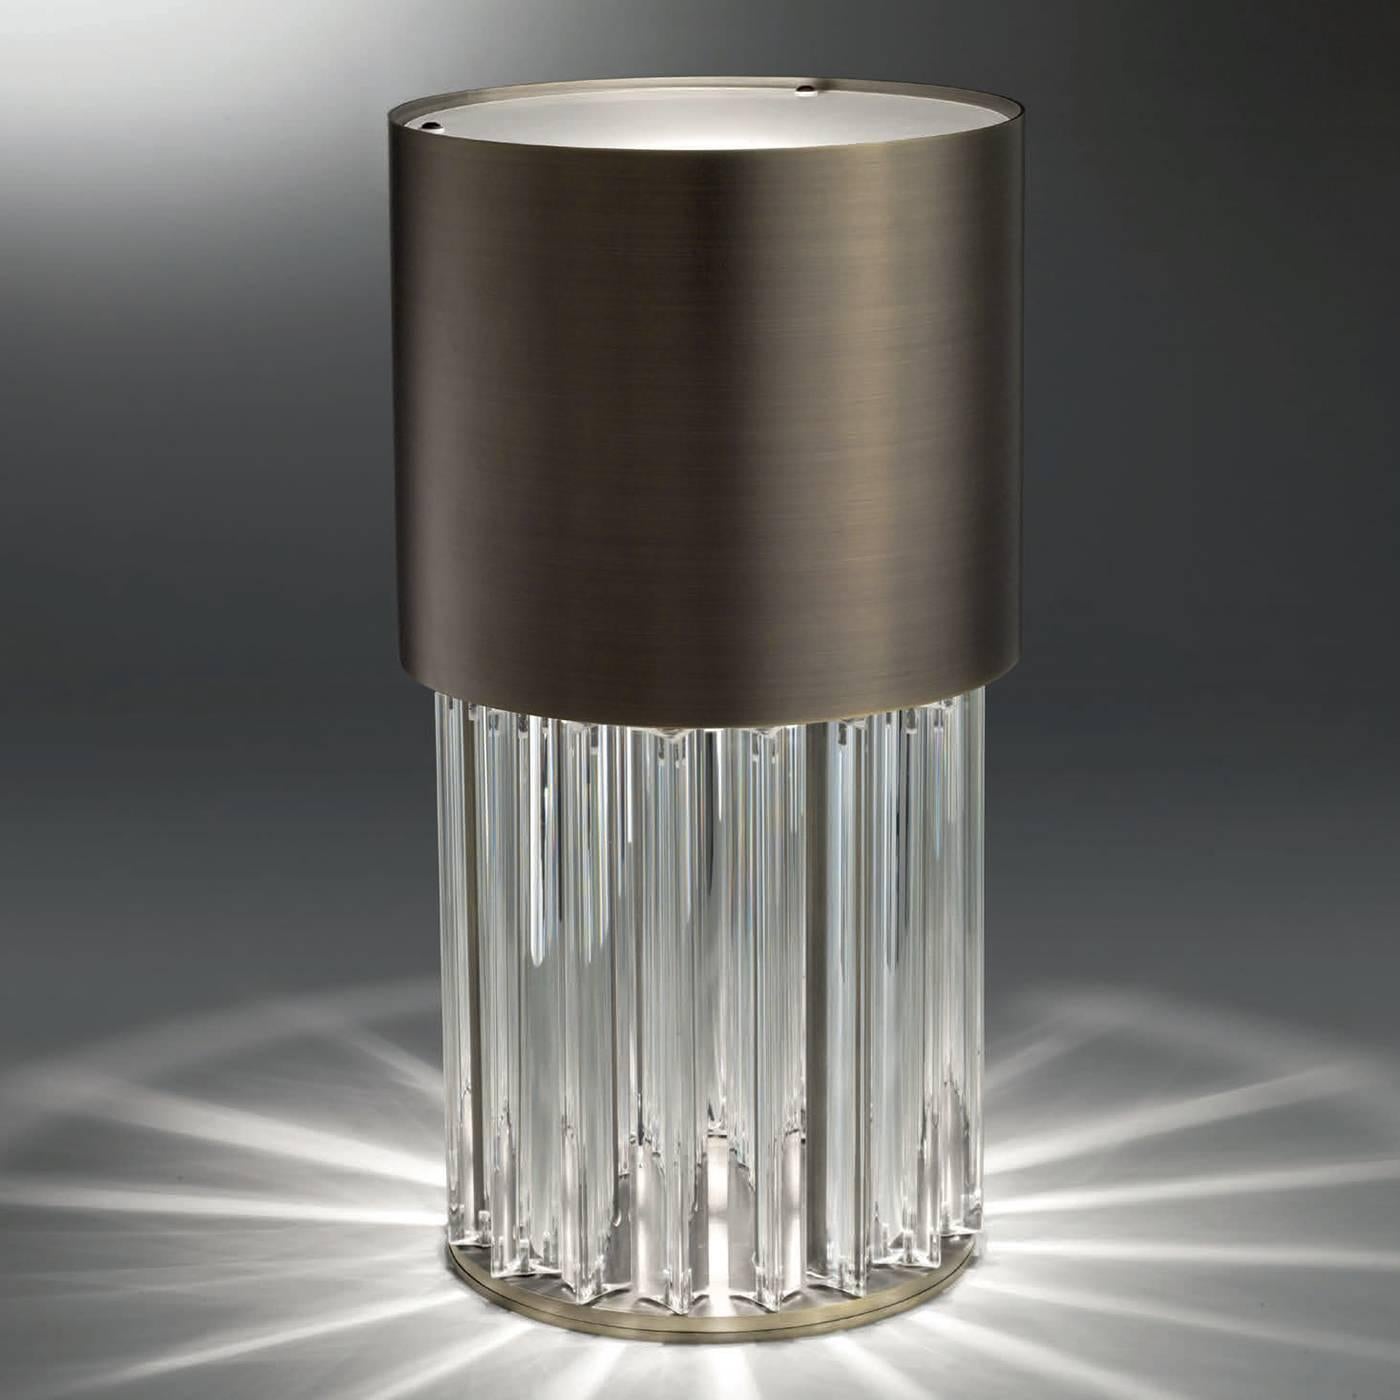 The sophisticated allure of this light comes from its precious materials and timeless lines that make an elegant and timeless Silhouette in the shape of a luminous cylinder with a dark bronze structure on top, supported by a series of trihedrons